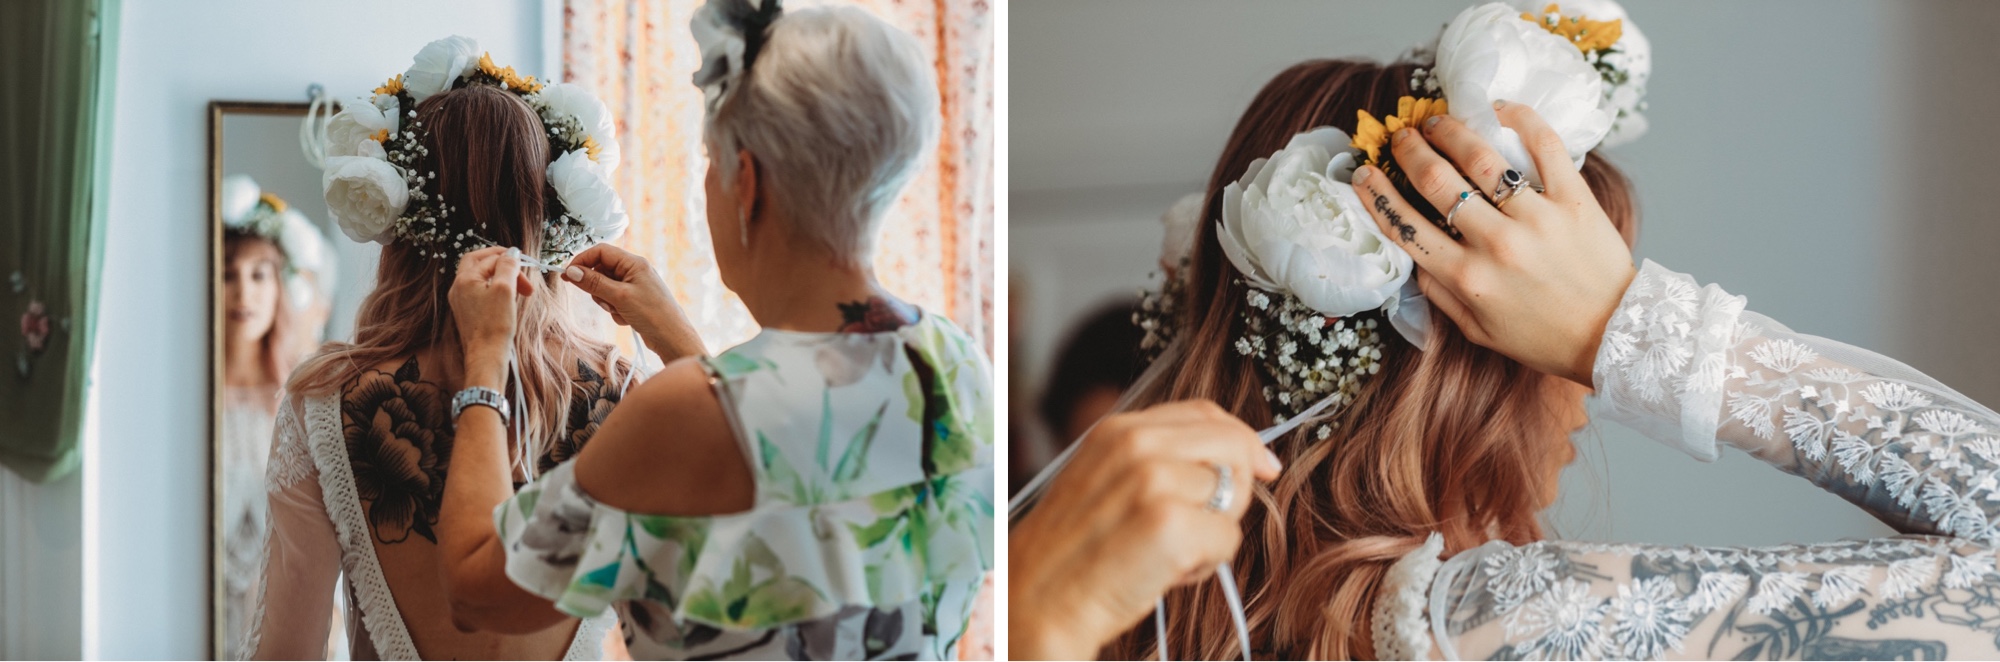 hackney London wedding floral crown by zakas photography 